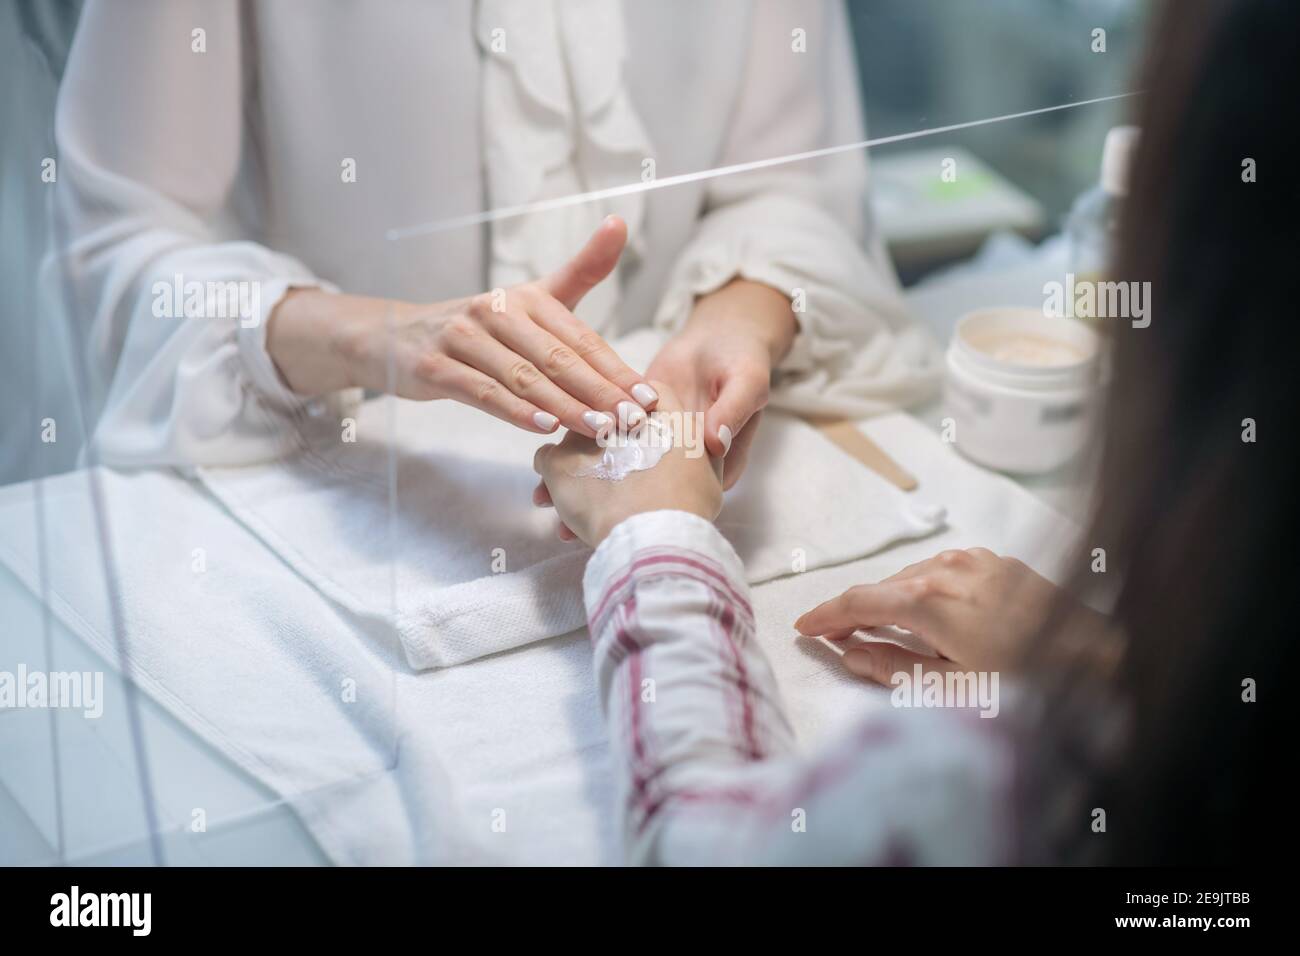 Close up picture of beautician hands applying cream on clients hands Stock Photo